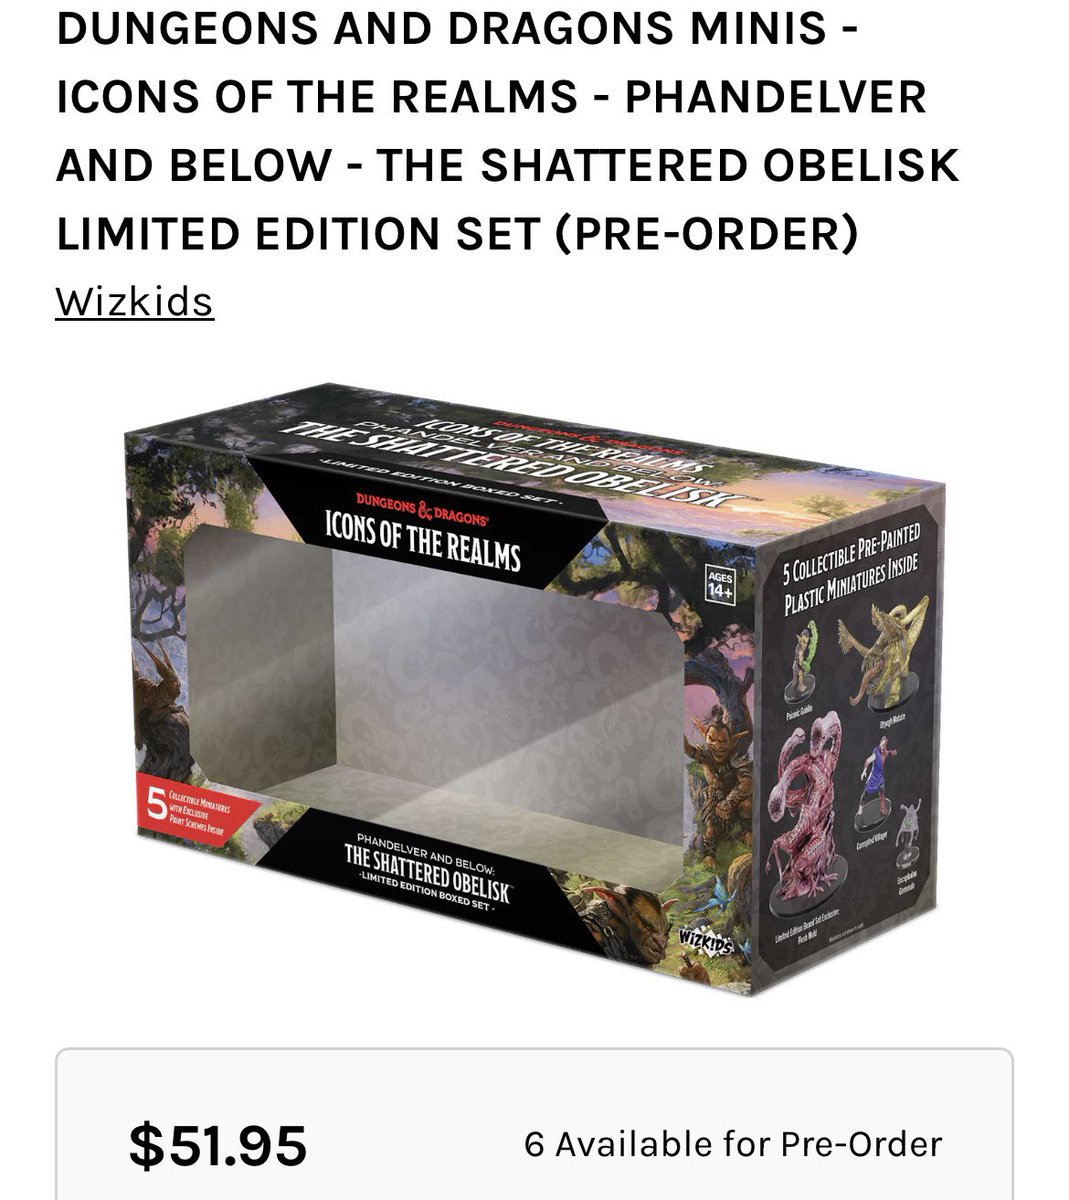 Wizkids has finally nailed the “invisible” mini look.